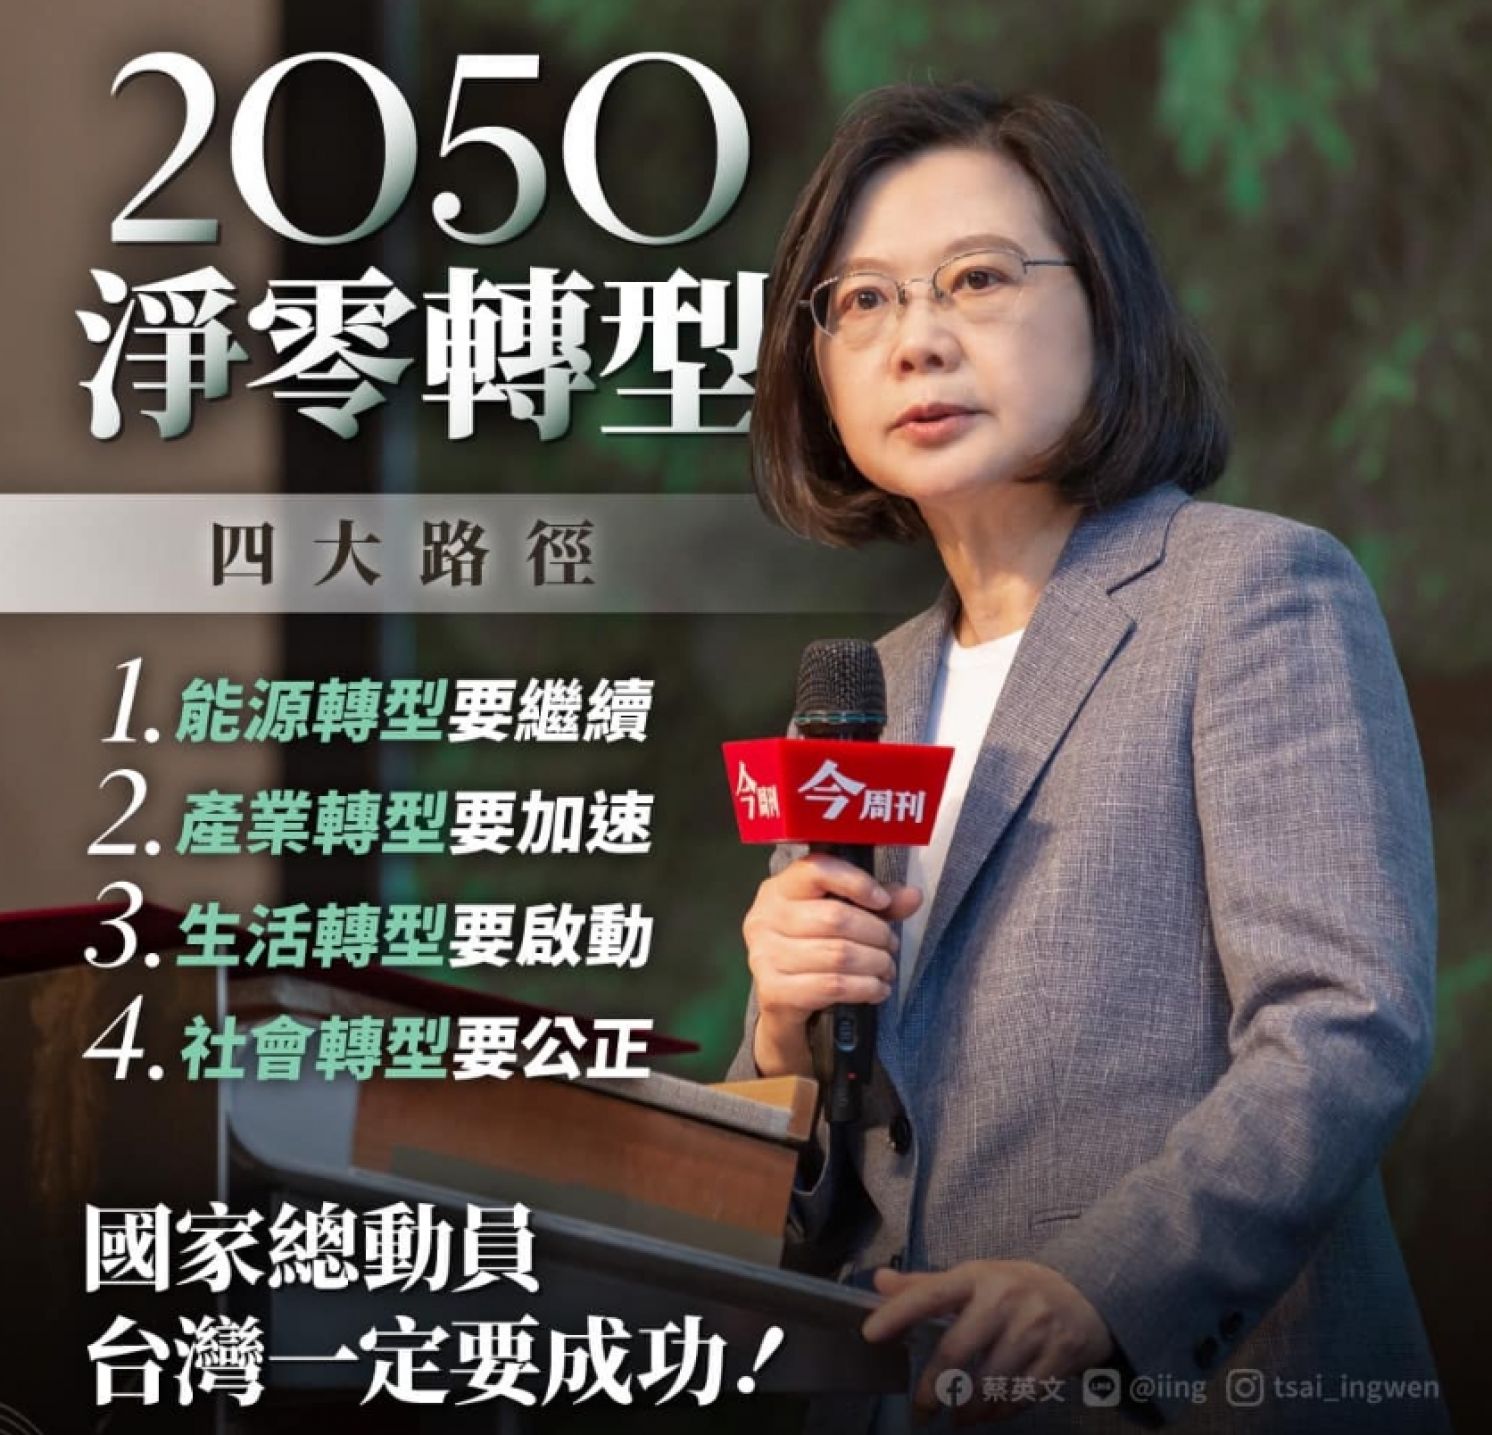 Asking the Devil to Bring the Cure：Tsai Administration Energy Policy Detriment to the Purse, Body, and Earth